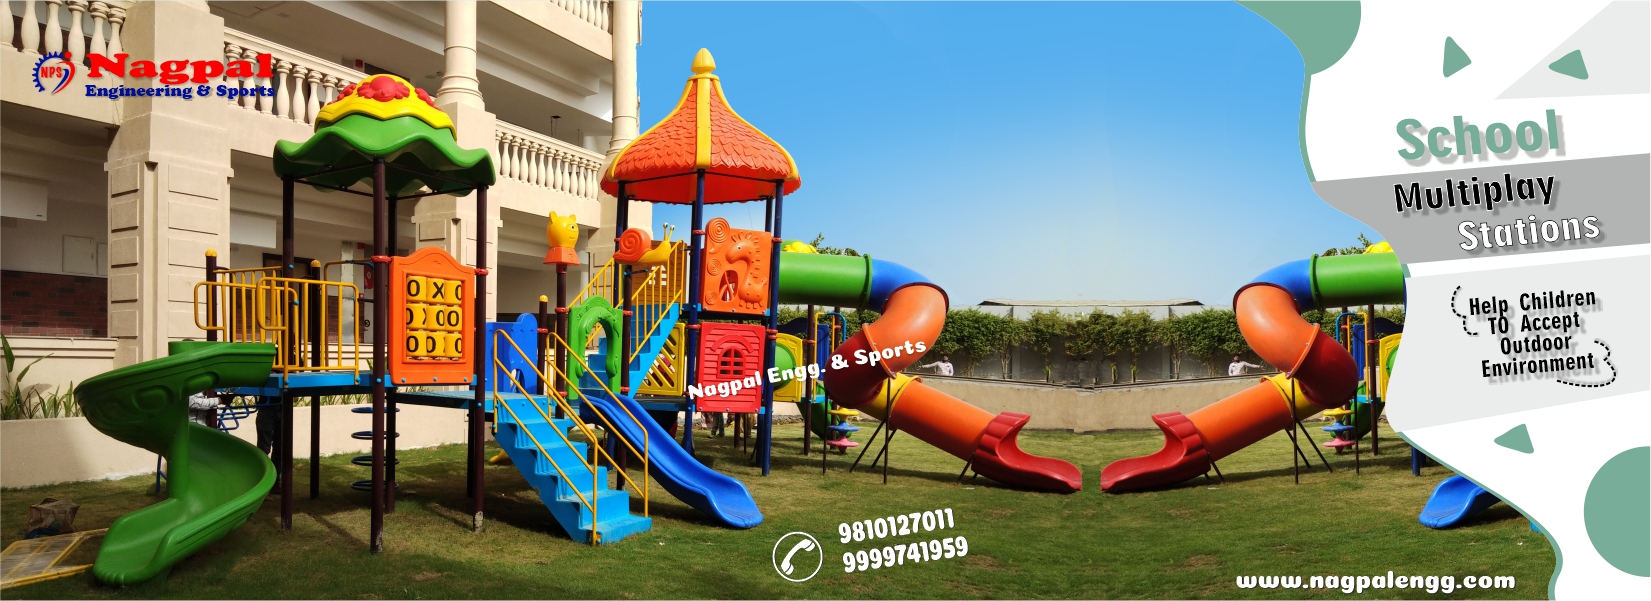 Roto Multiplay System Manufacturers, Exporters & Suppliers in Dehradun